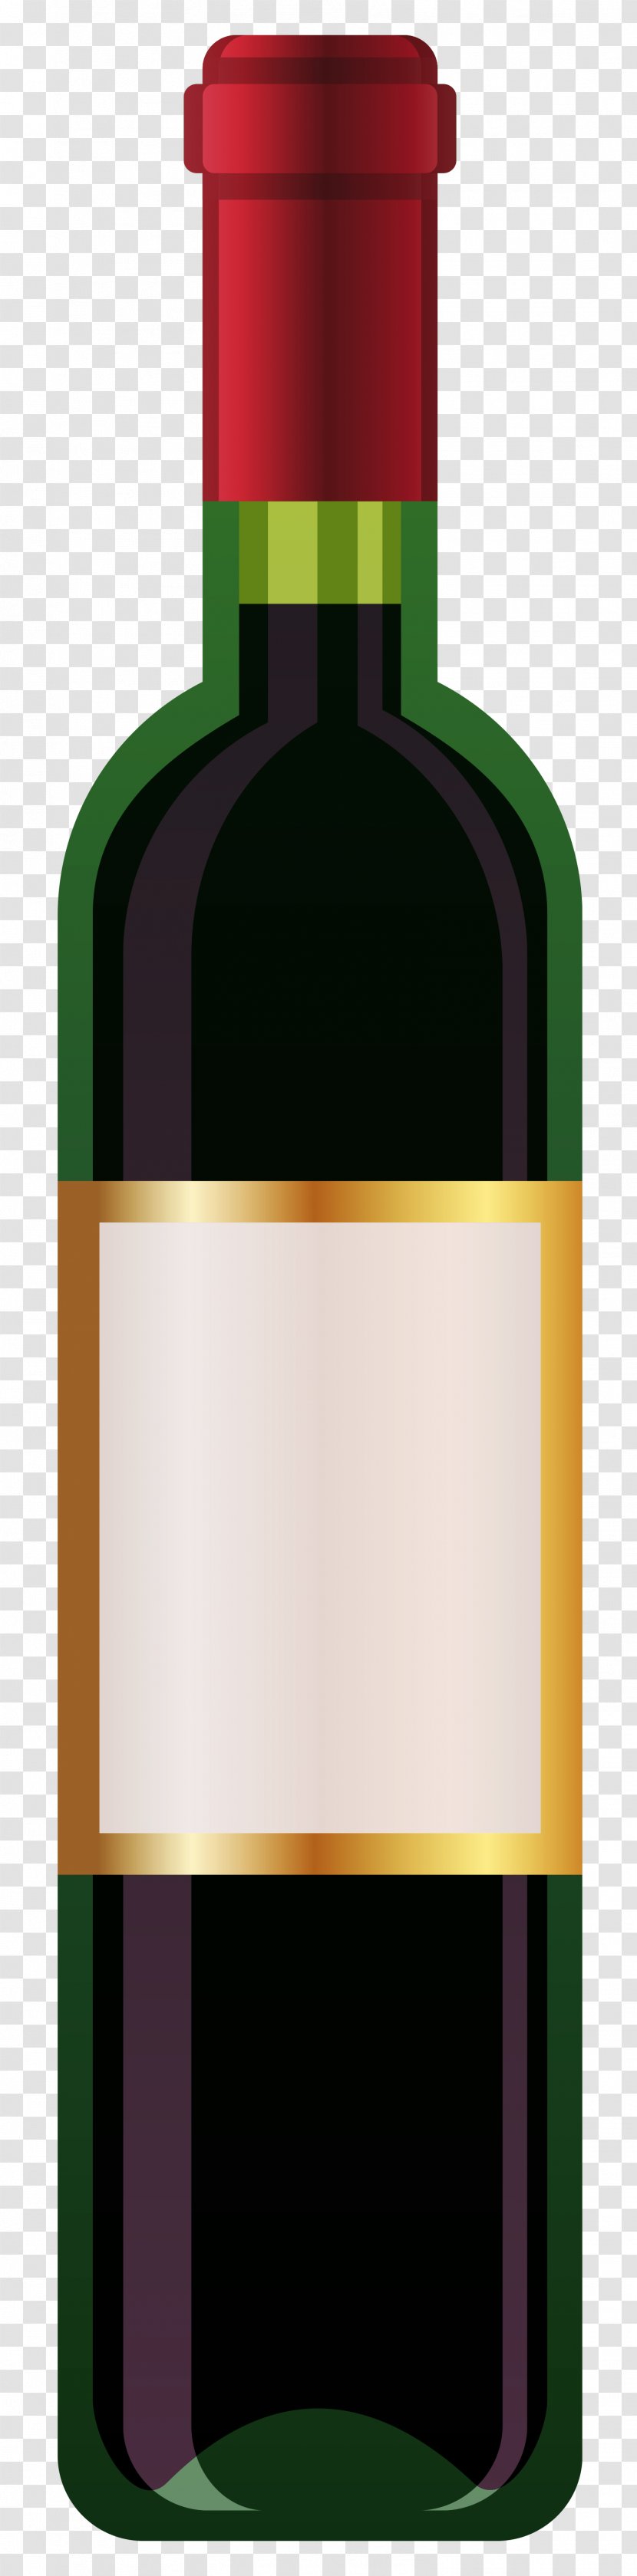 Red Wine White Champagne Burgundy - Bottle Transparent PNG